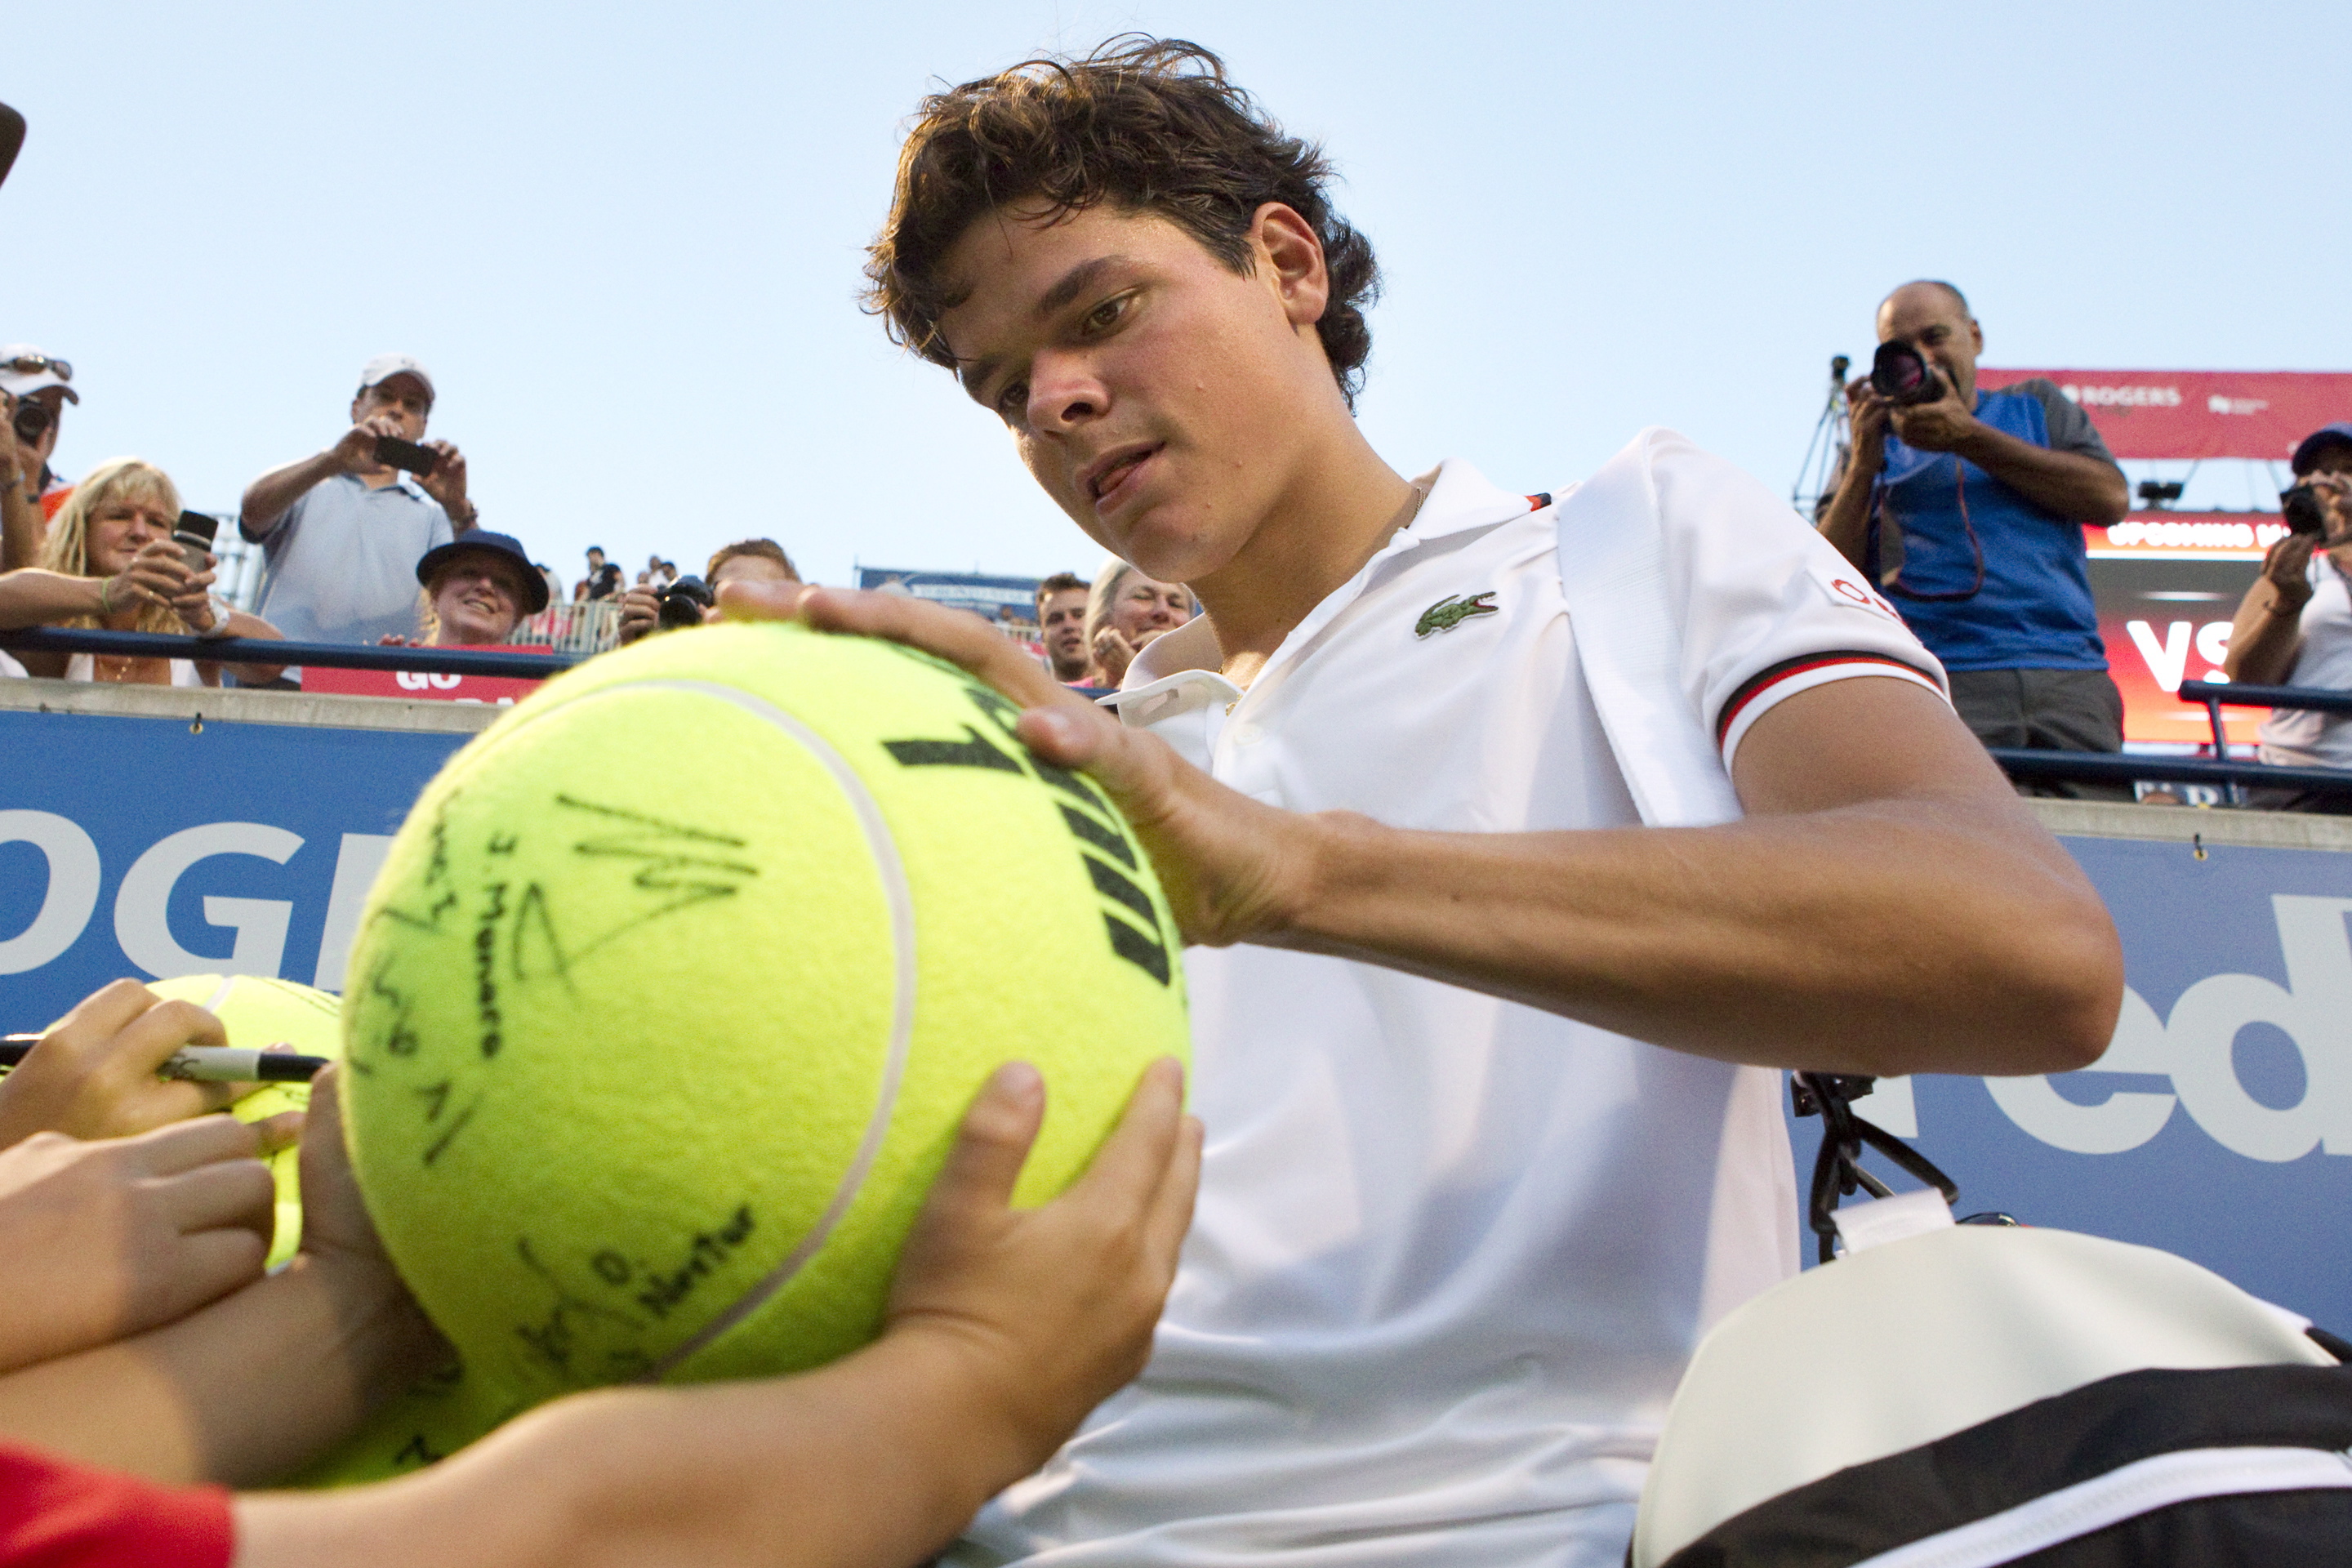 Canada's Milos Raonic signs autographs following his 6-3 6-4 win over Serbia's Viktor Troicki during the Rogers Cup in Toronto on Tuesday August 8, 2012. THE CANADIAN PRESS/Chris Young